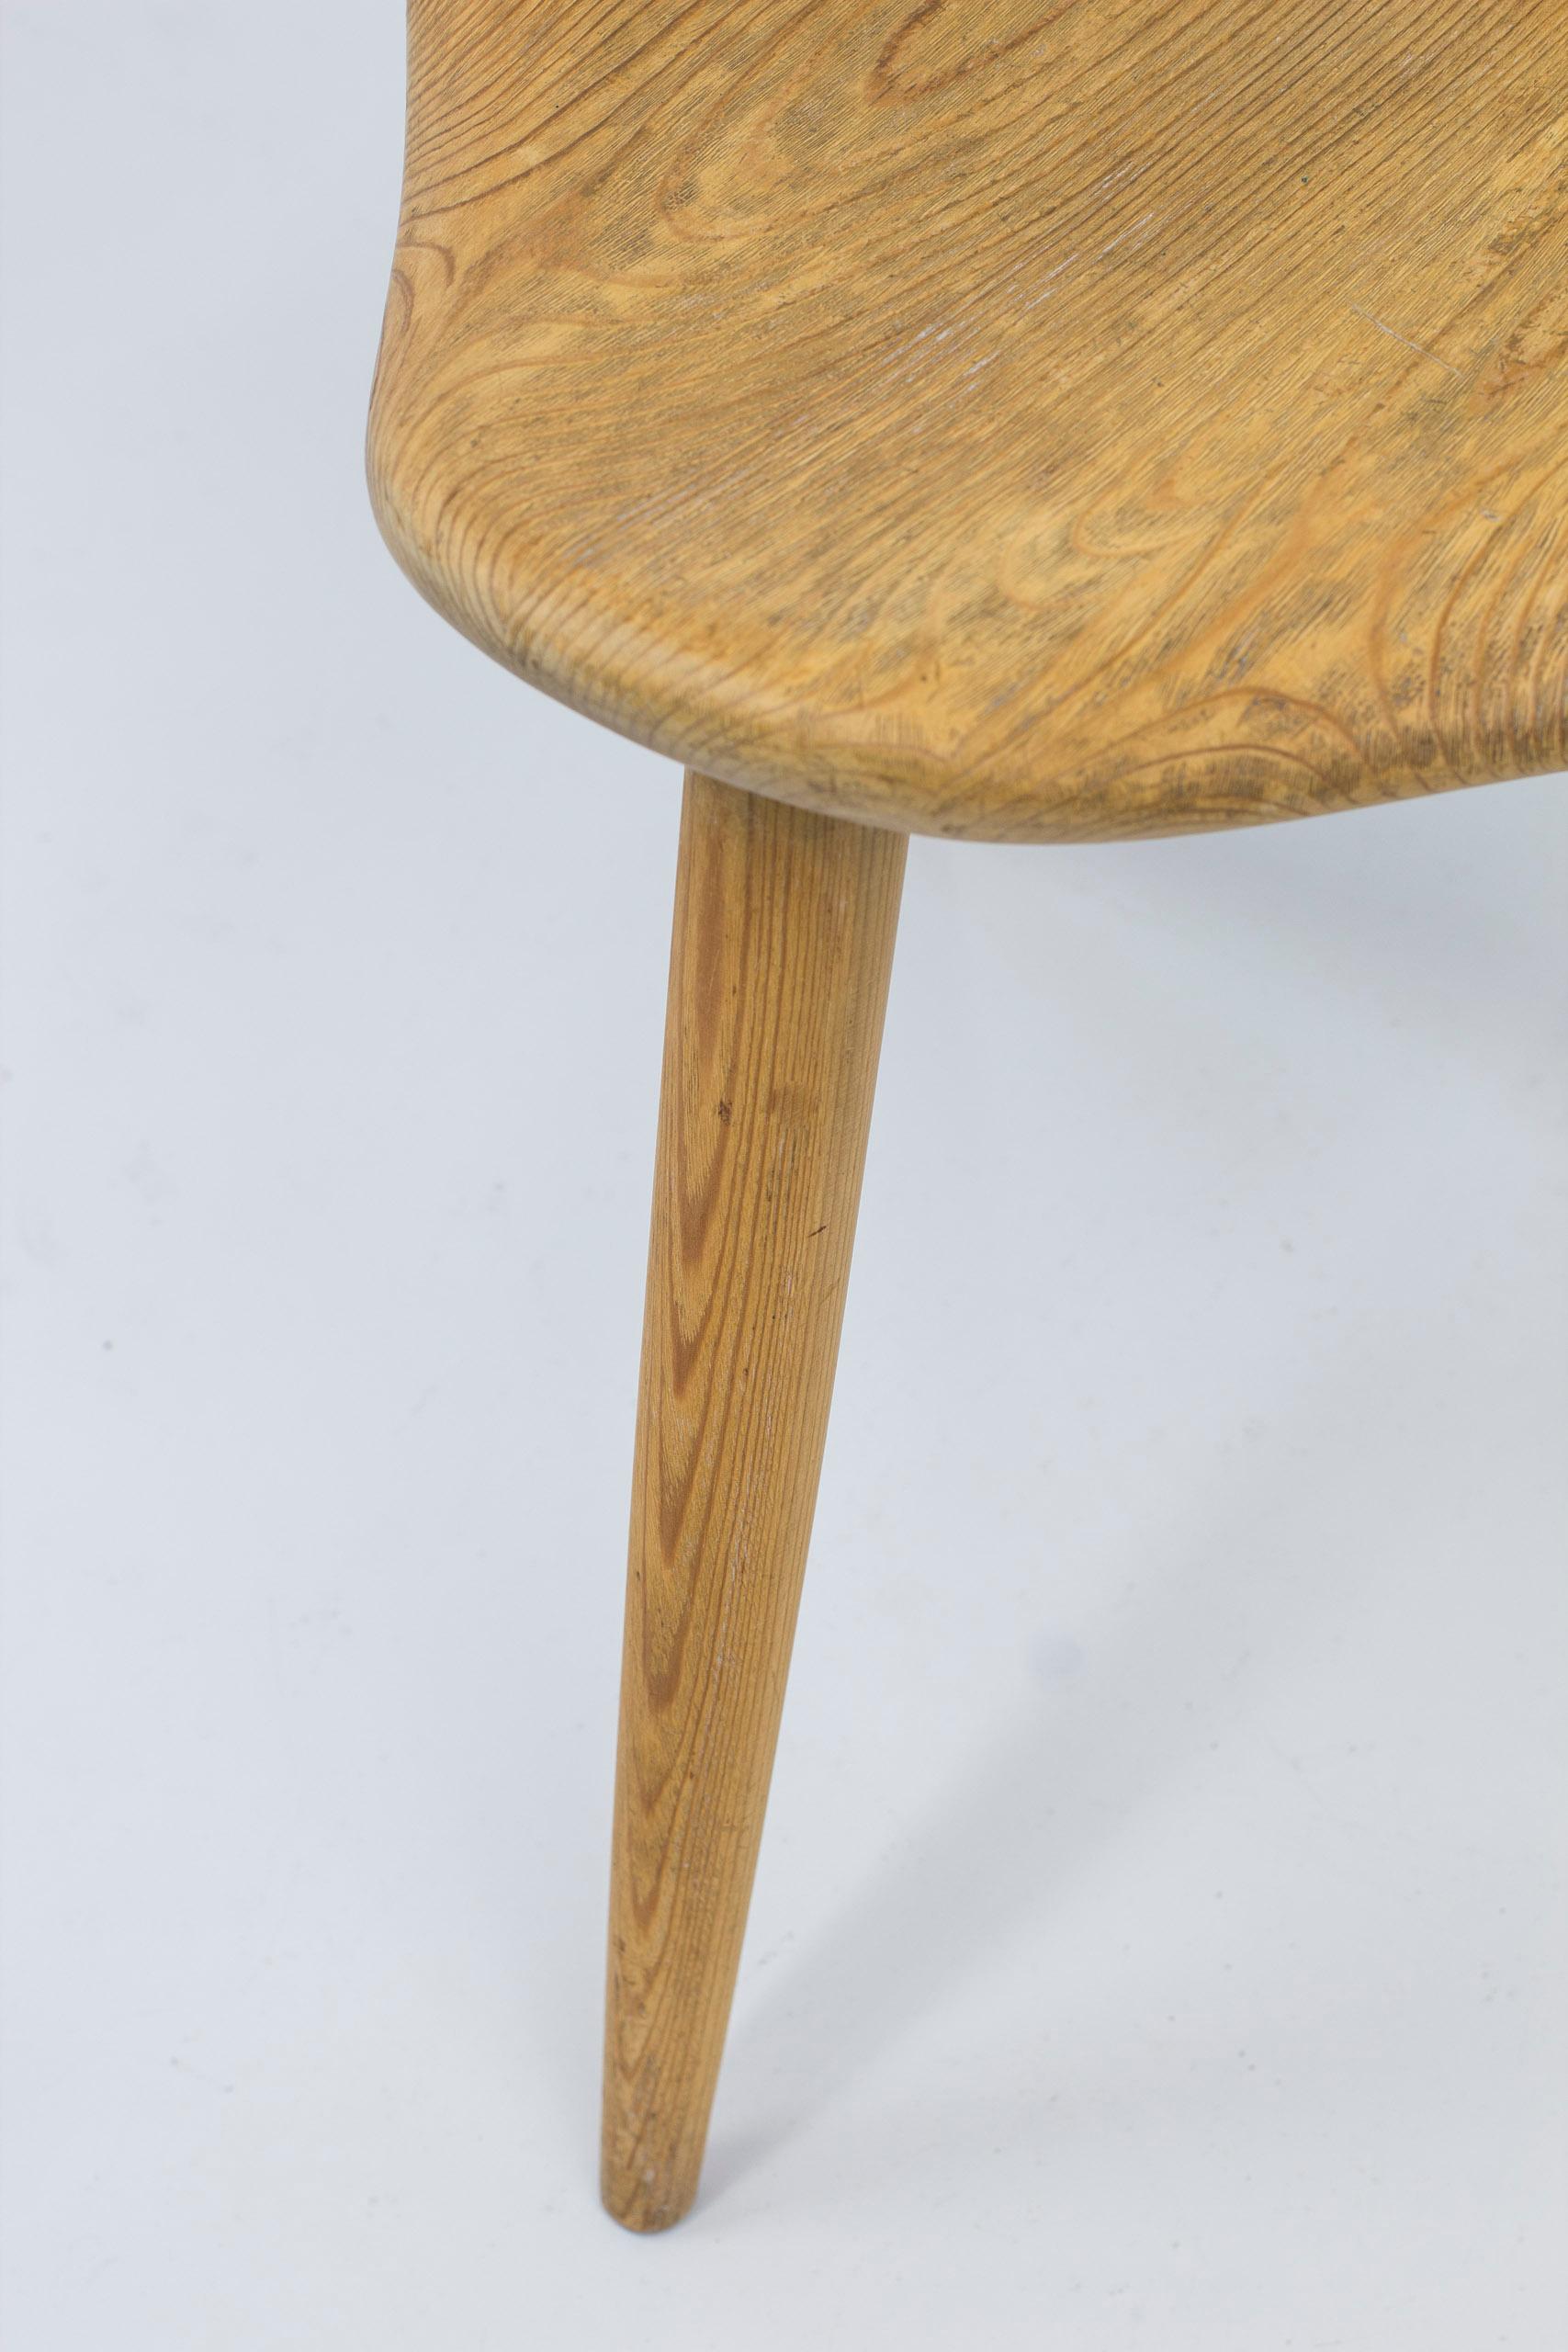 Sportstuge Stool in Solid Pine Made in Norway by Norsk Husflid, circa 1950s For Sale 3